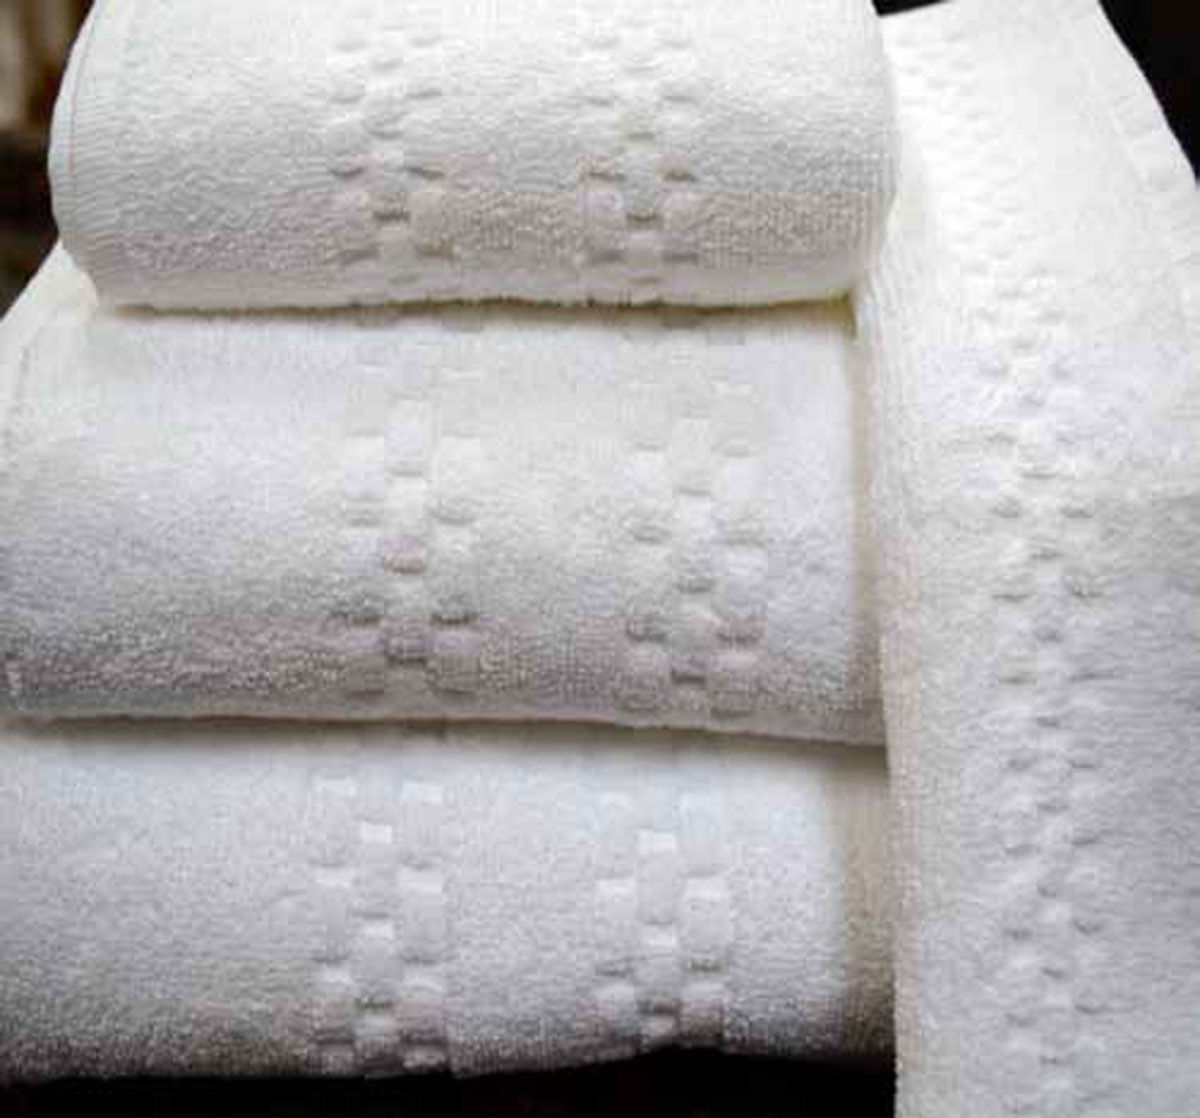 Oxford Viceroy Room Towels Questions & Answers